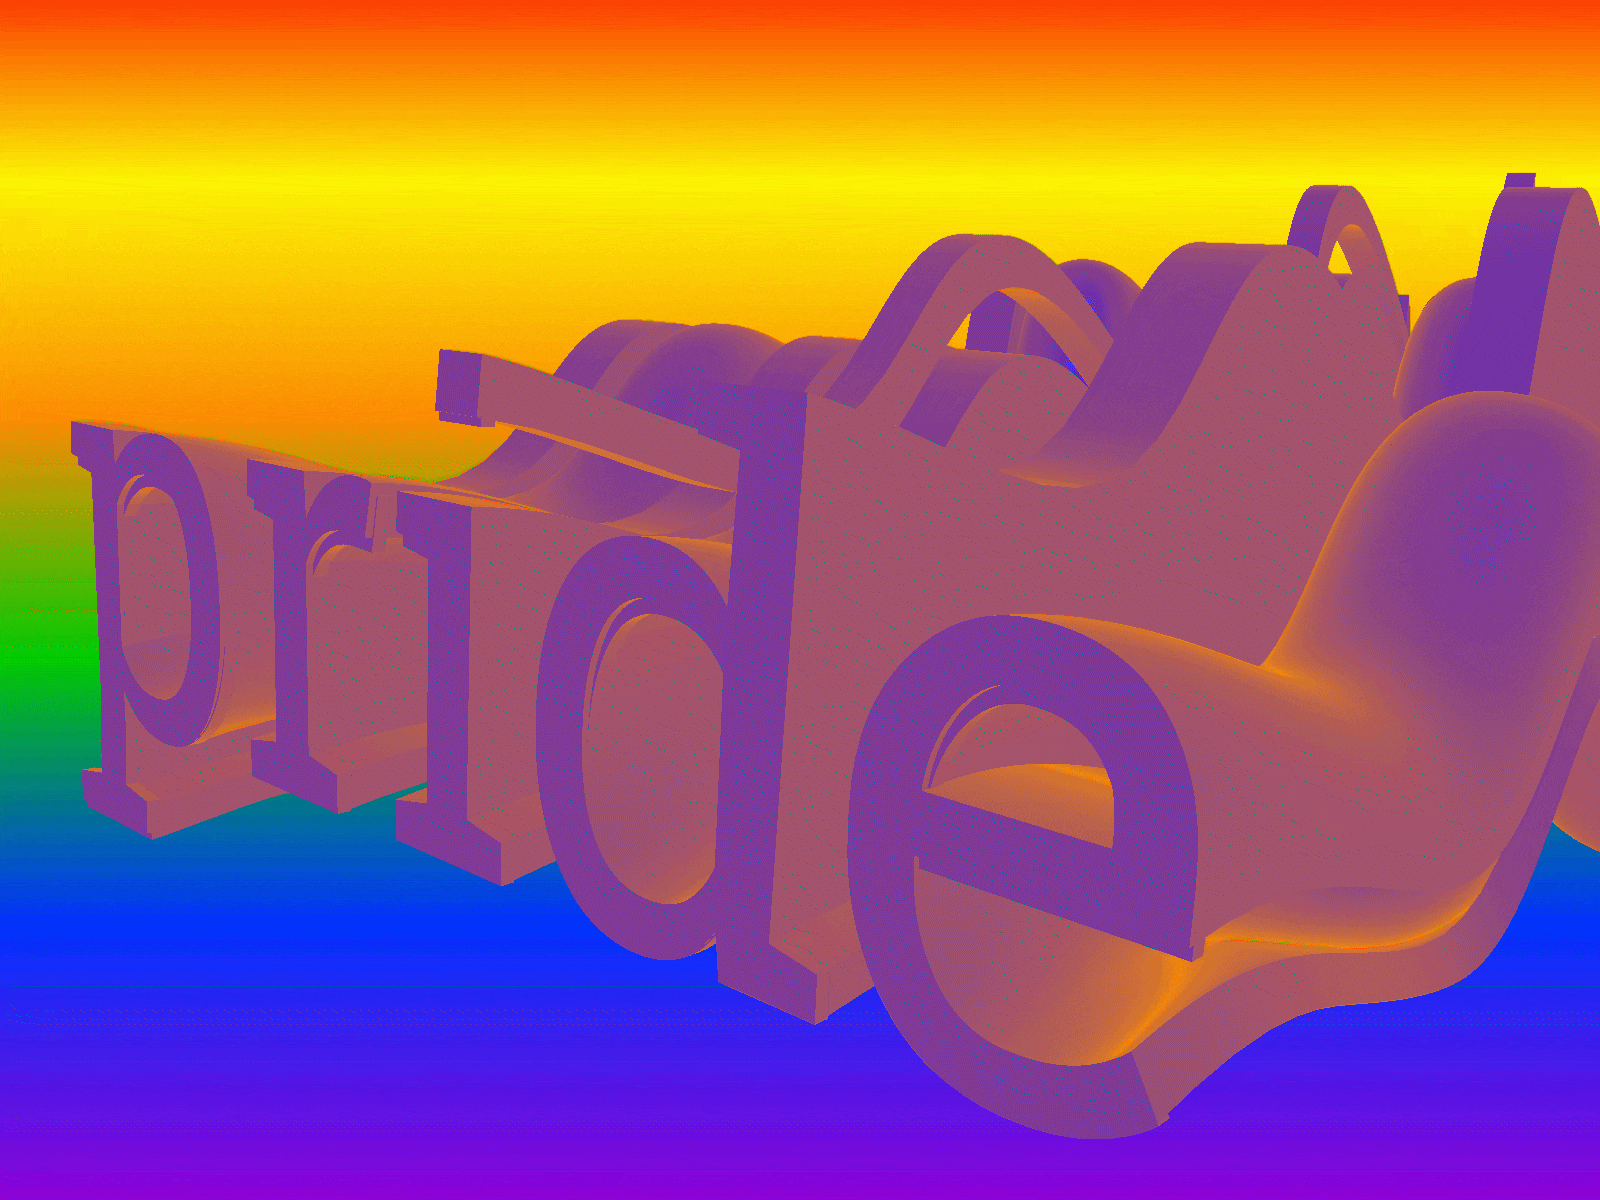 PRIDE after effect animated type animation animation design cinema 4d cinema4d color exploration colorful colors digital art gradient gradients motion design moving type pride pride 2020 pride month pridemonth rainbow typography